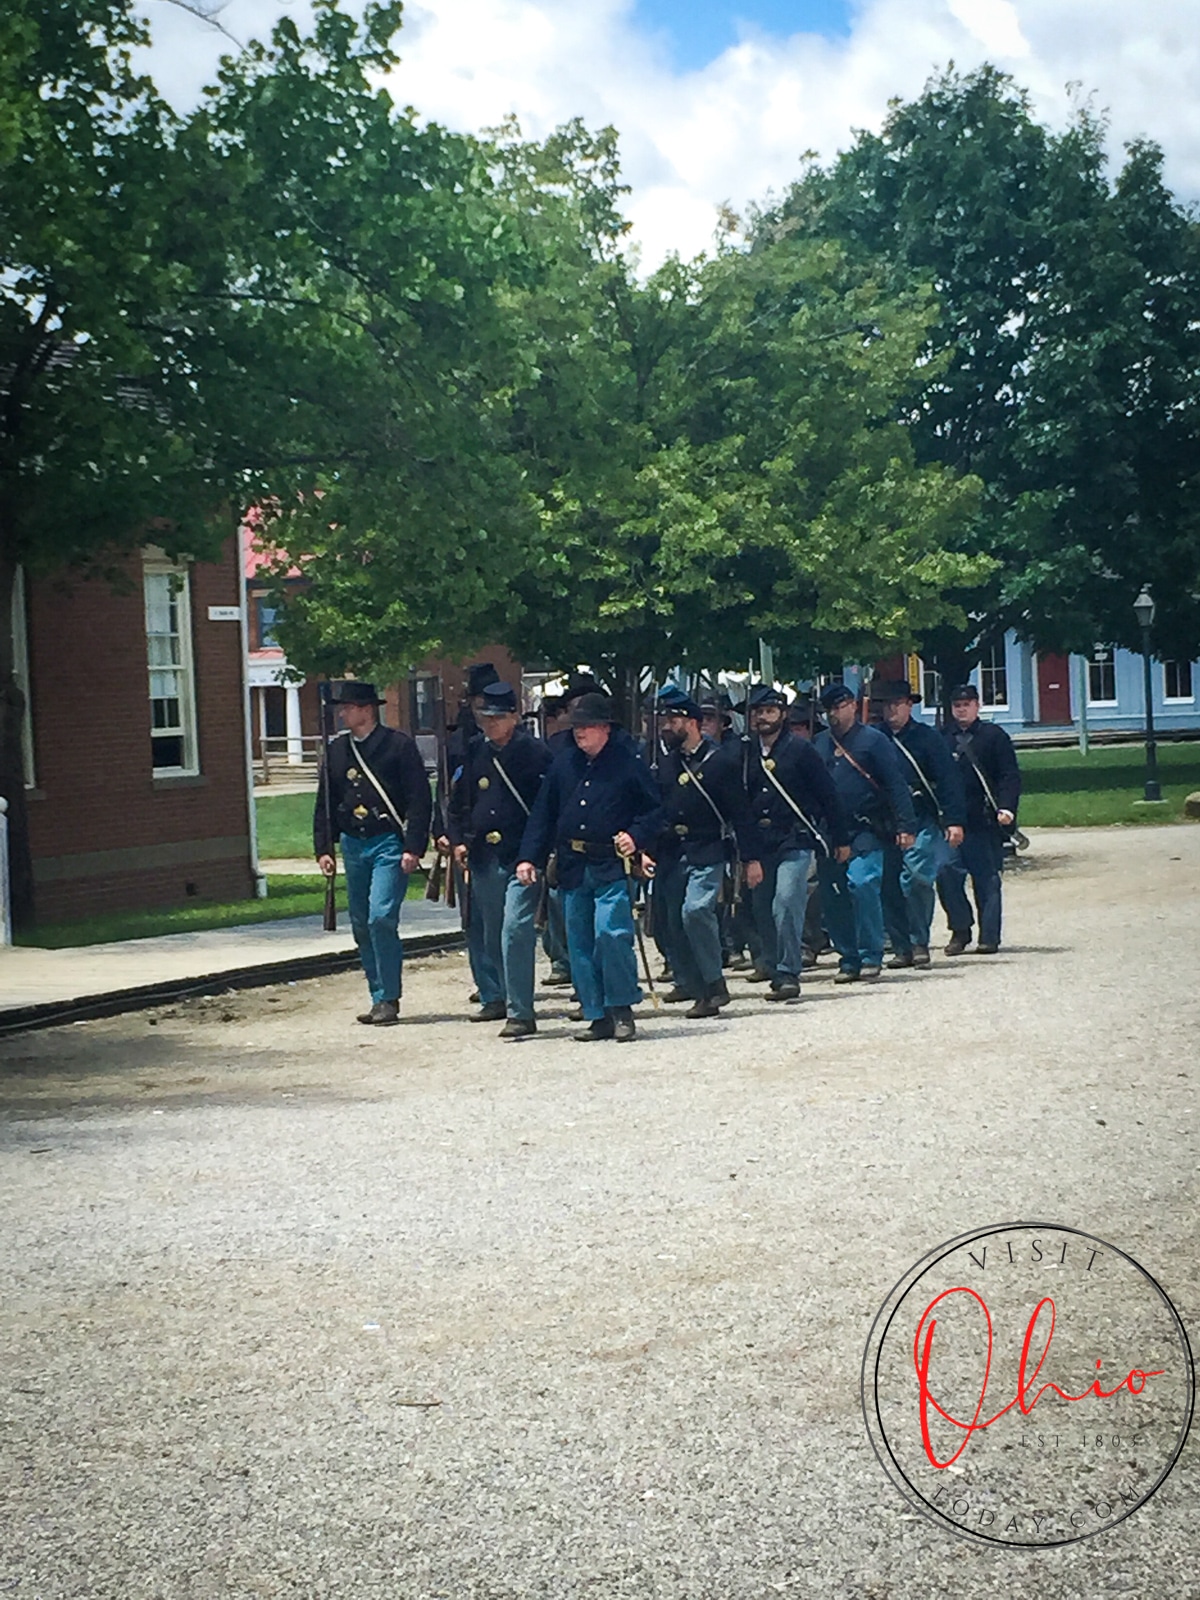 civil war army marching down dirt road at Ohio village Photo credit: Cindy Gordon of VisitOhioToday.com